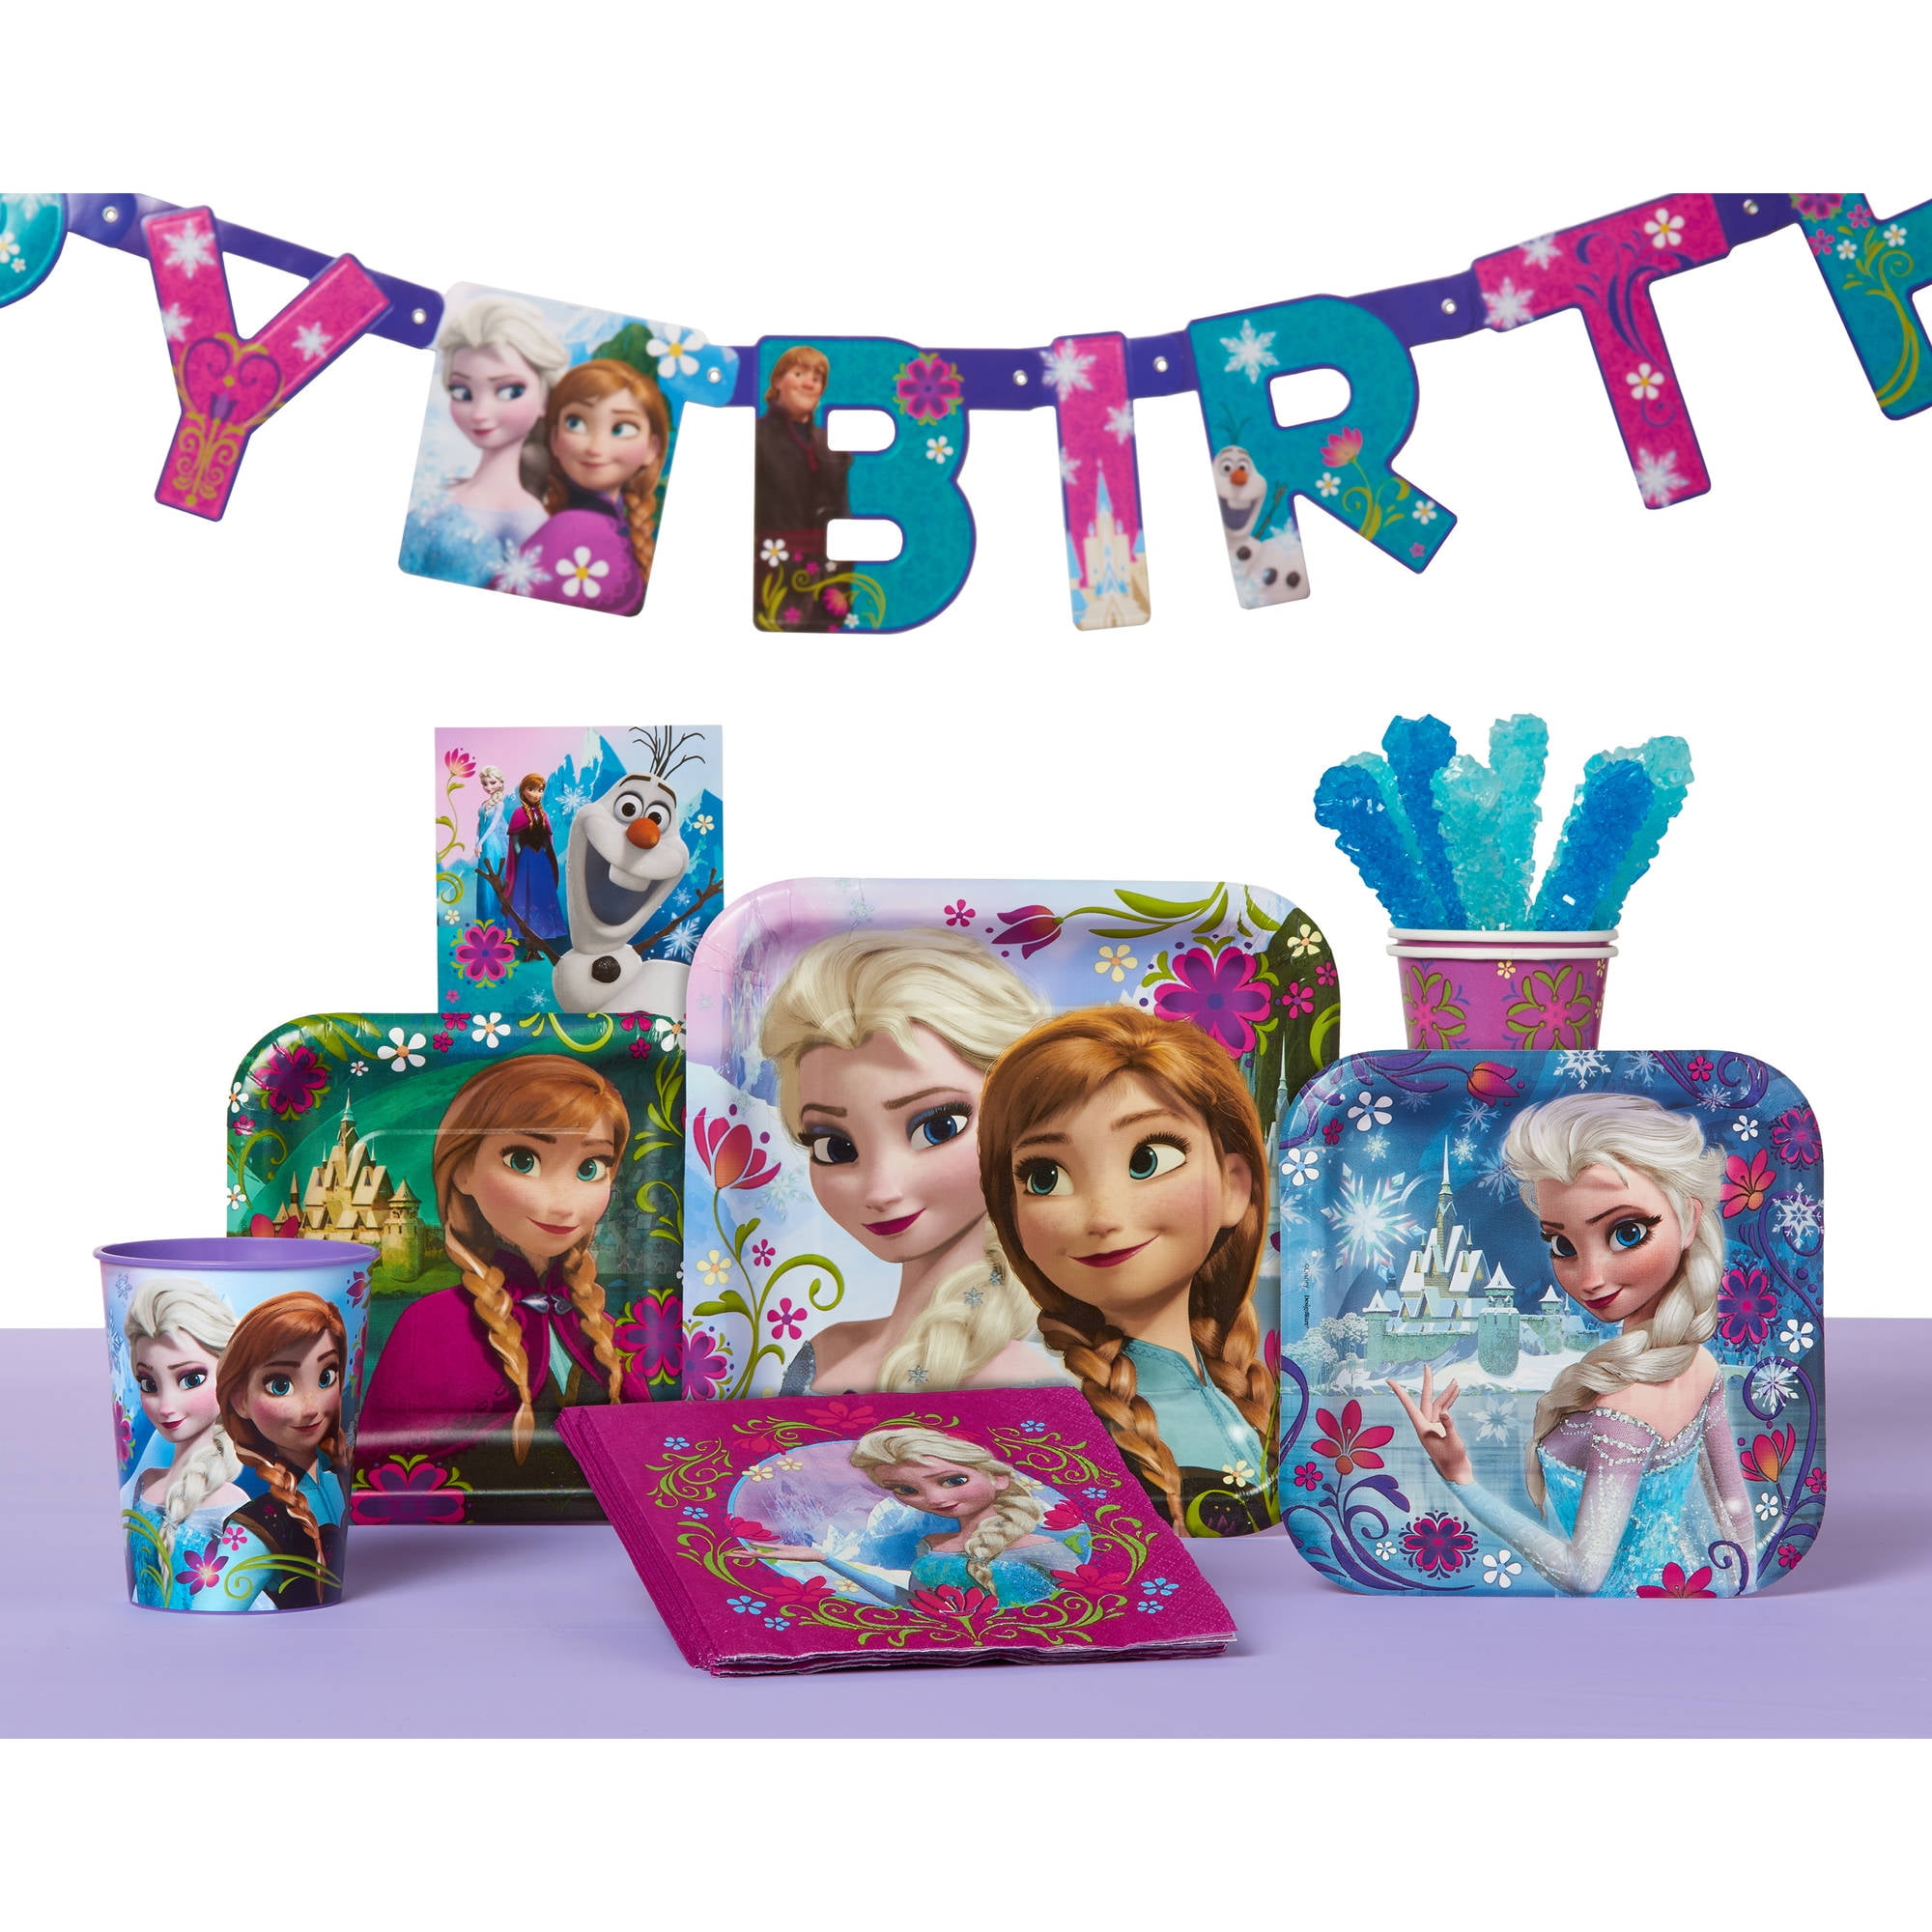 FROZEN HAPPY BIRTHDAY ADD YOUR OWN AGE BANNER Disney Party Decoration 121416